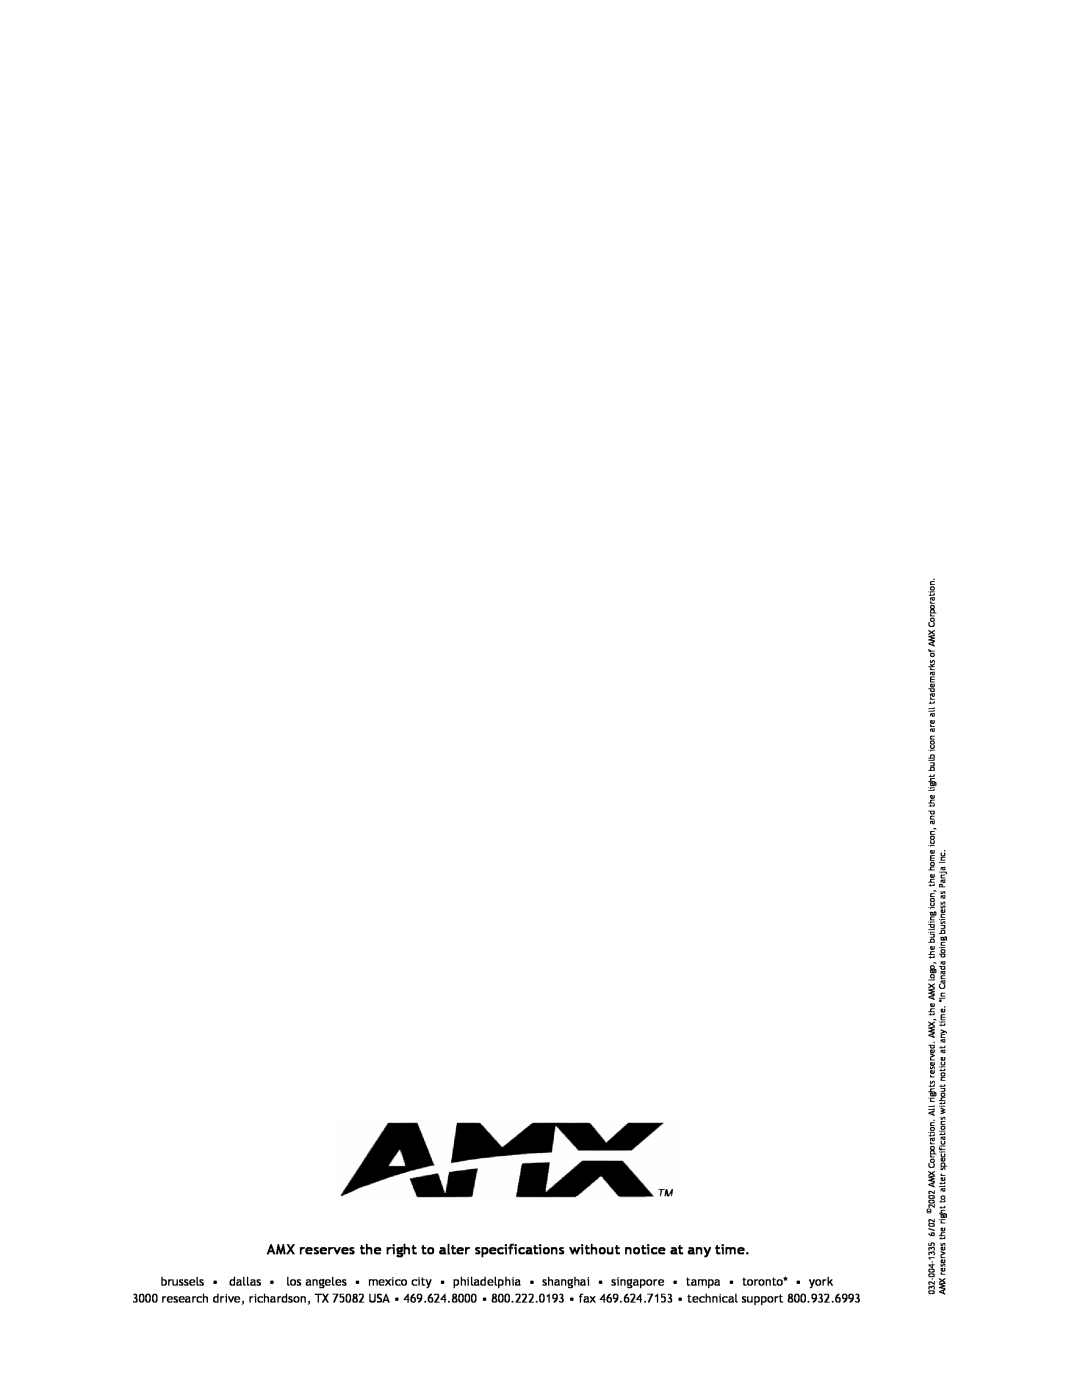 AMX AXB-MIDI Panja Inc, AMX reserves, the building icon, doing business as, AMX logo, In Canada, 2002AMX Corporation, 6/02 